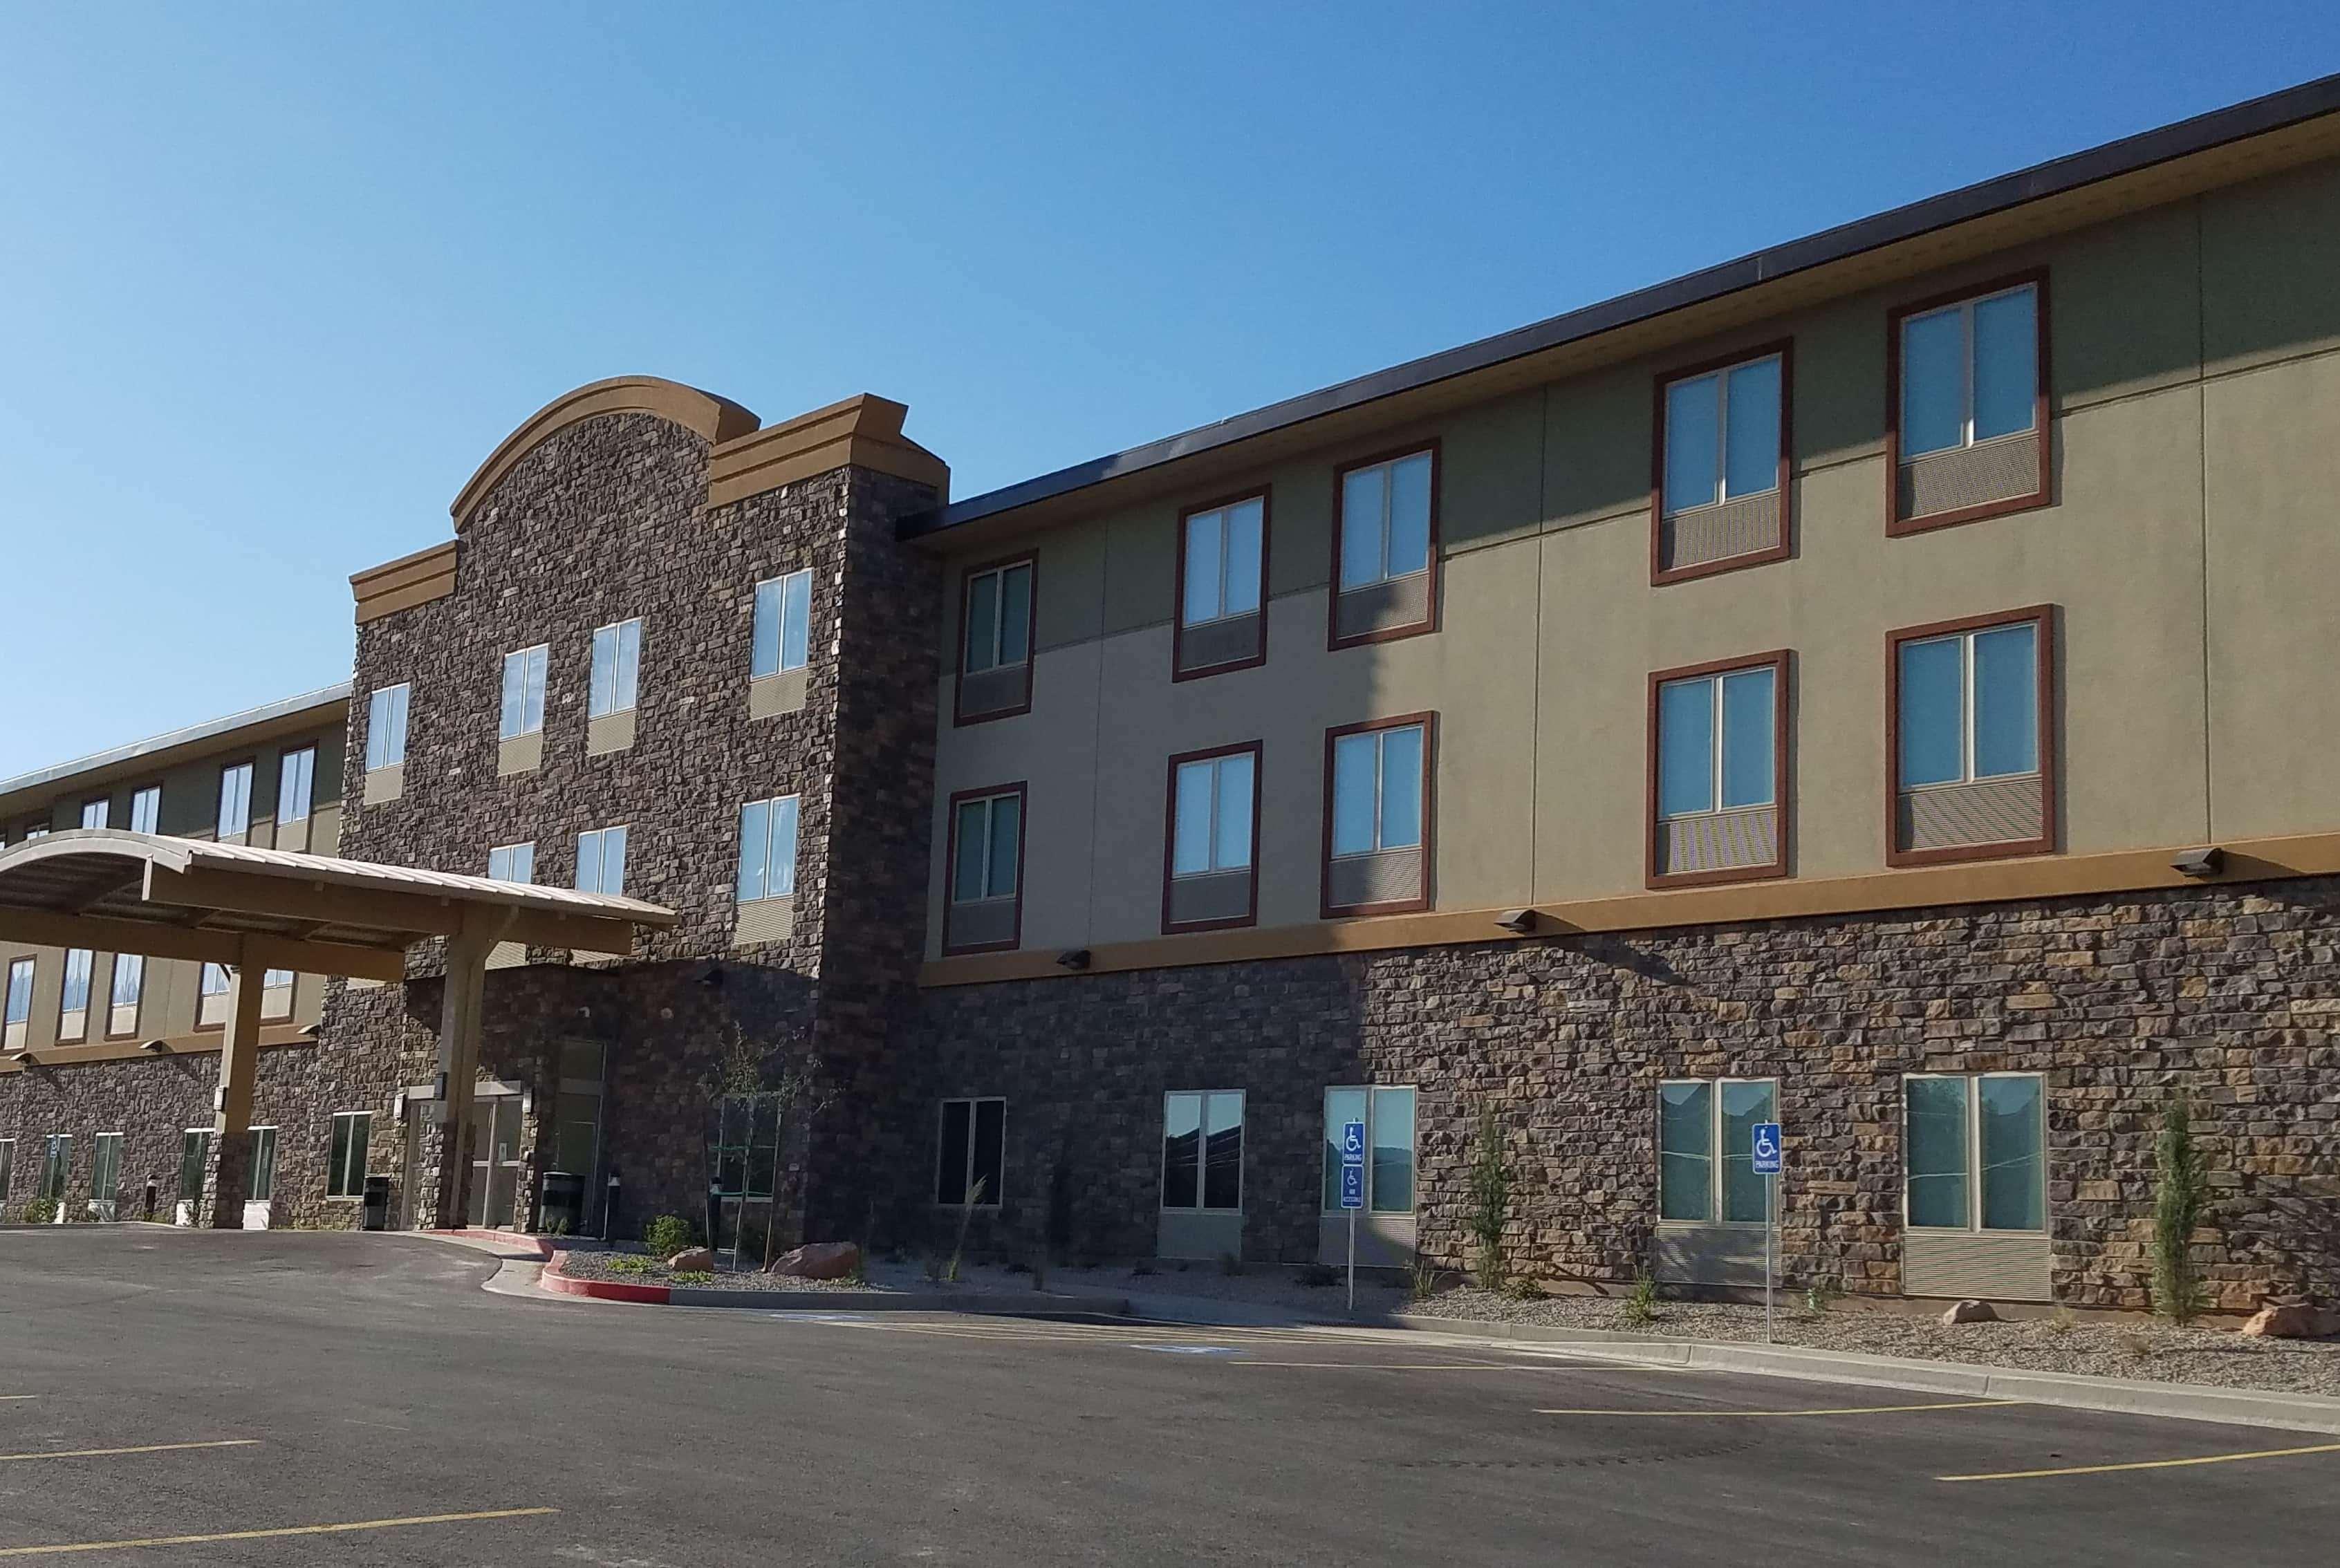 Wingate By Wyndham Moab Hotel Exterior photo